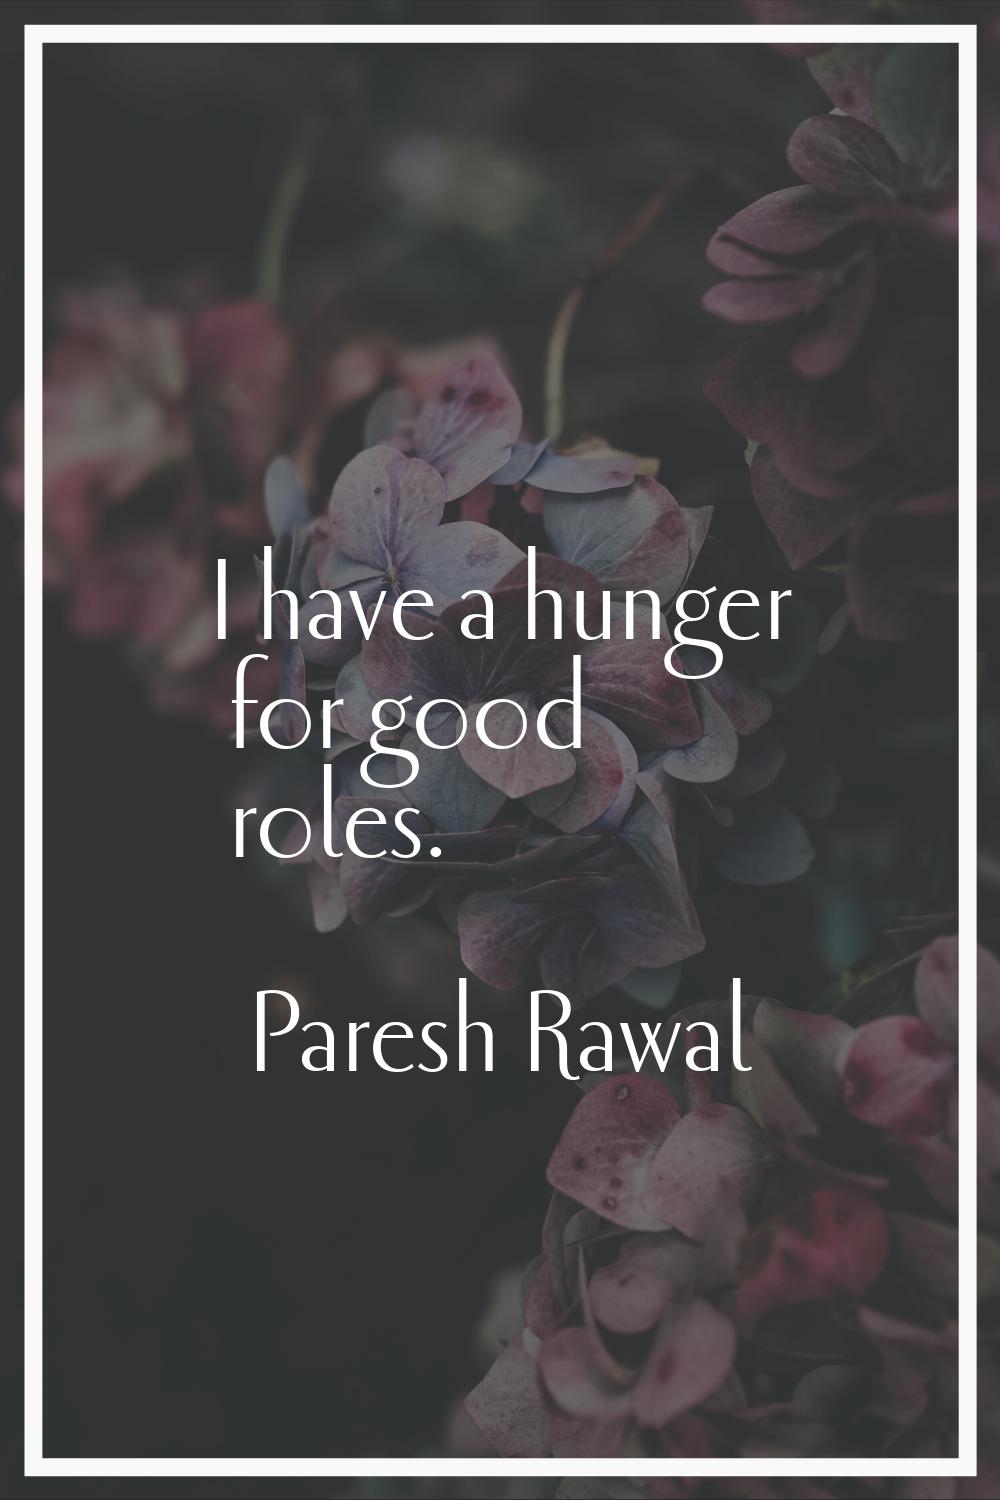 I have a hunger for good roles.